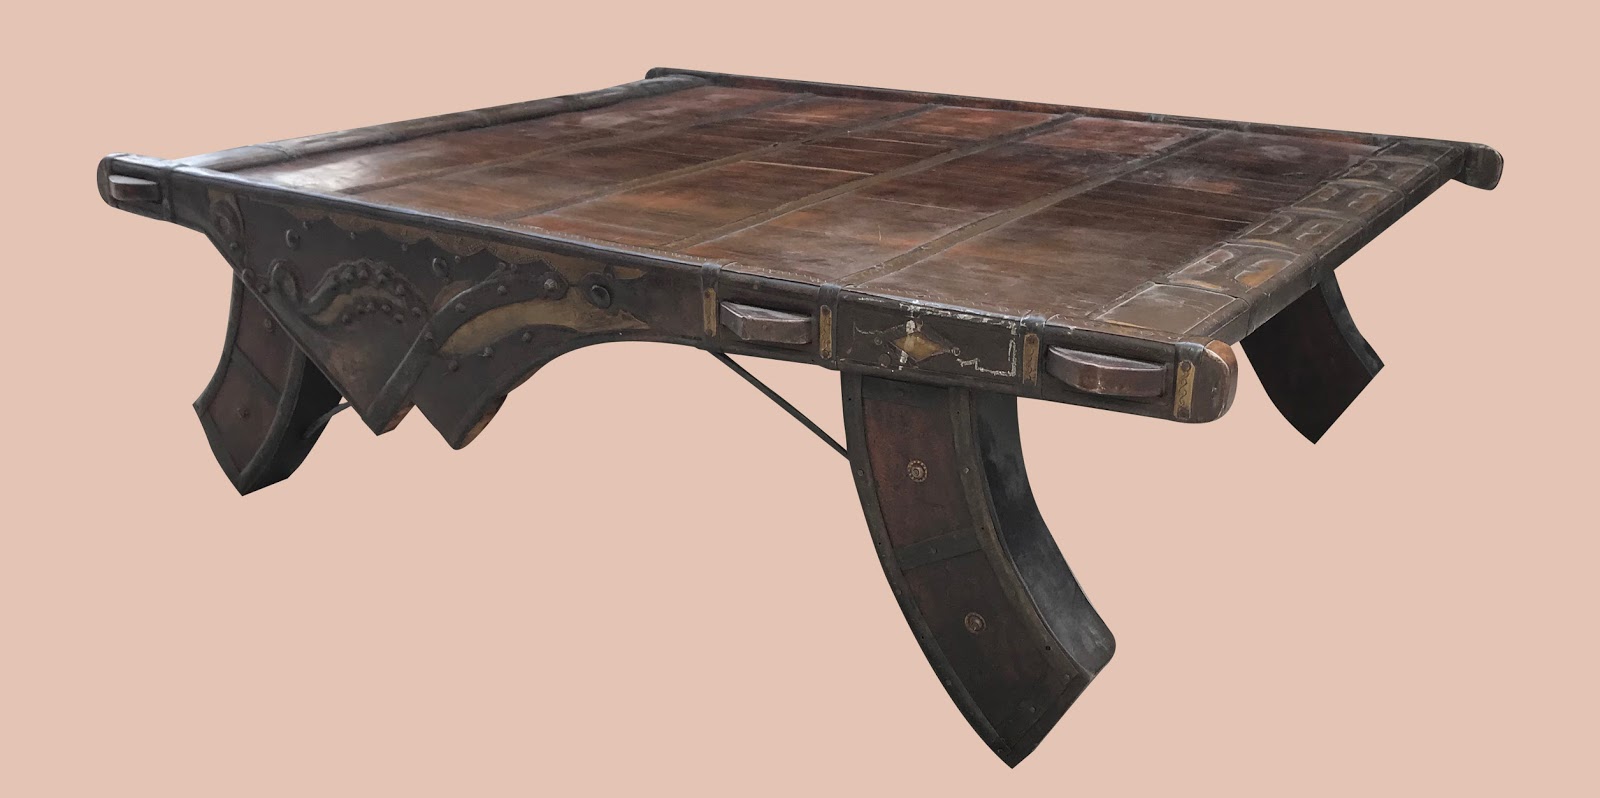 Uhuru Furniture & Collectibles: Gorgeous African Hand Carved Table with